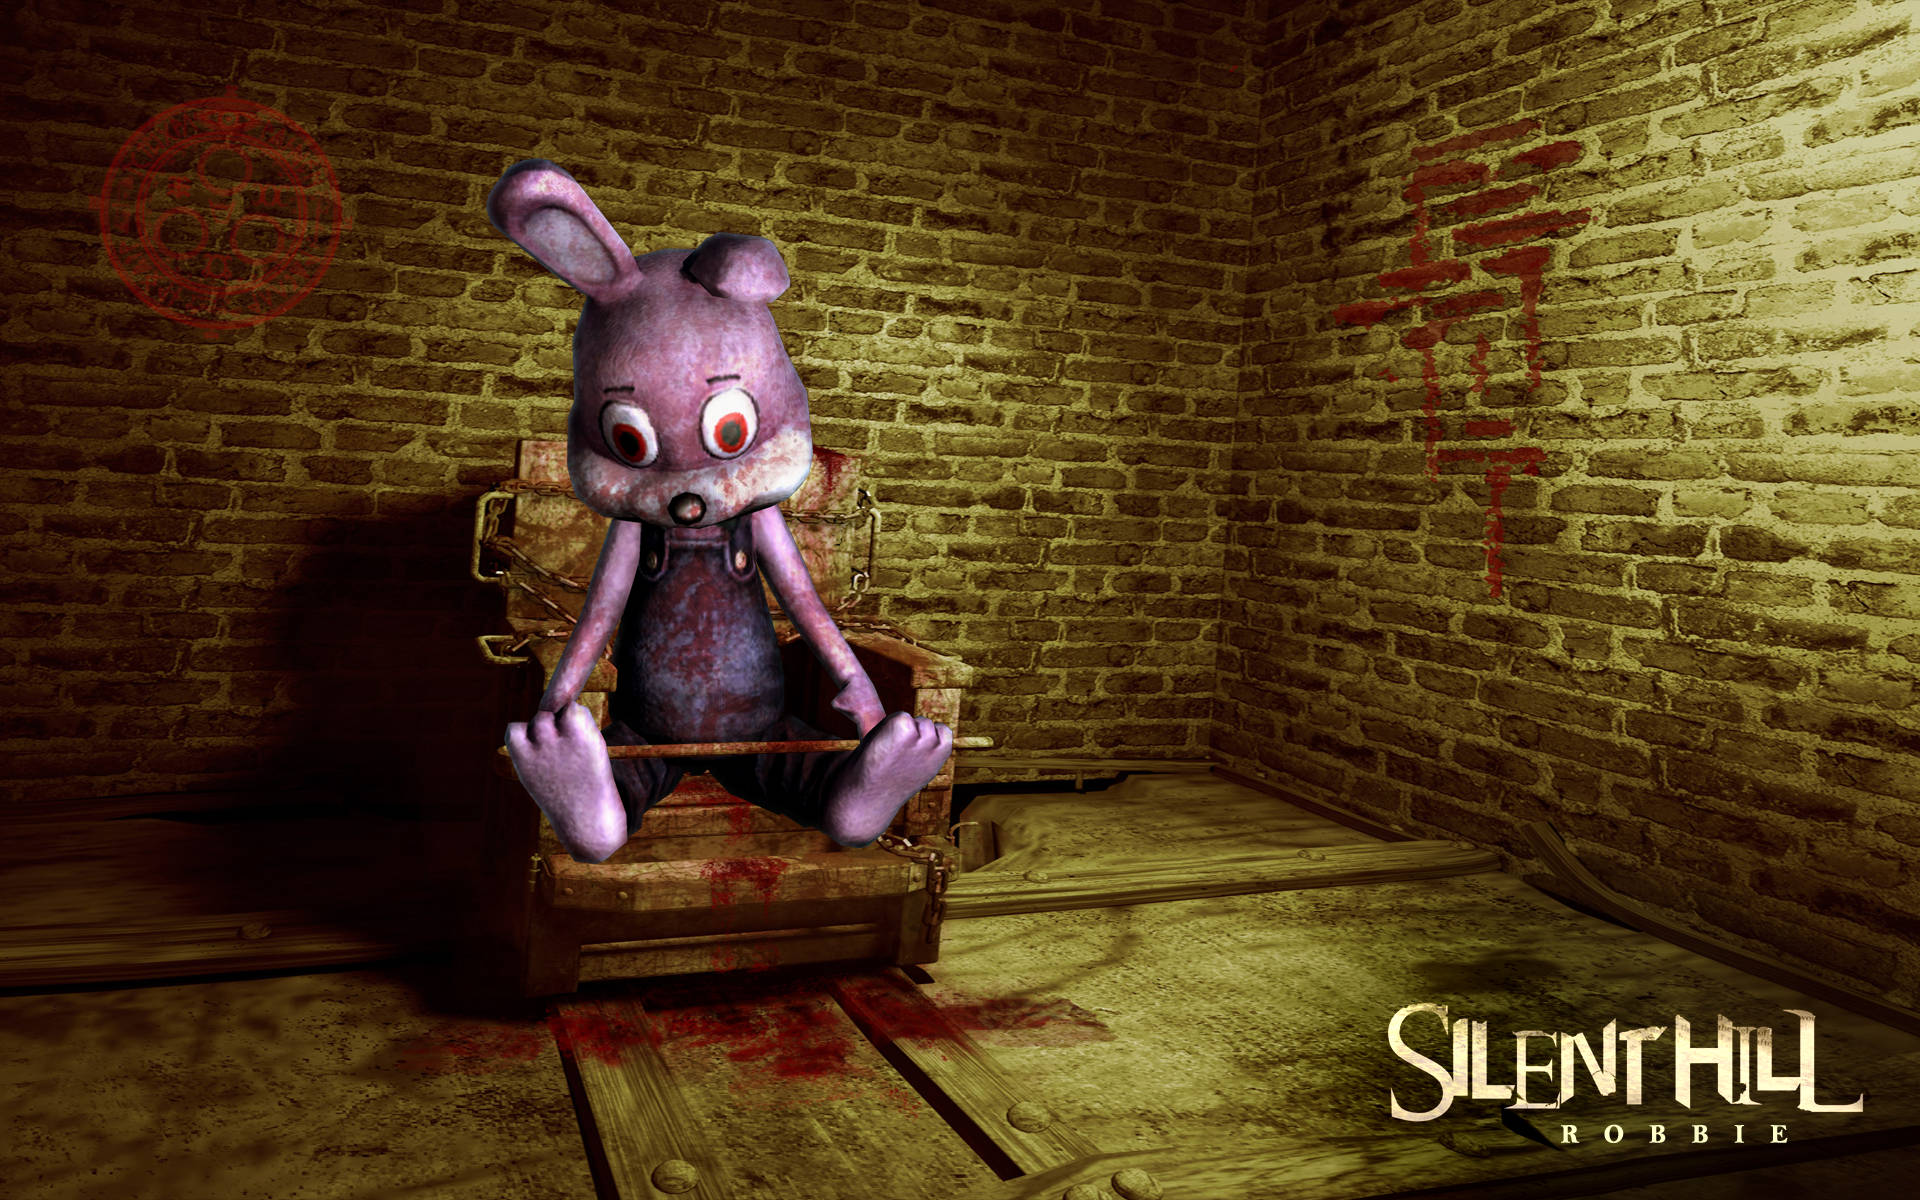 Scary Silent Hill Robbie Background